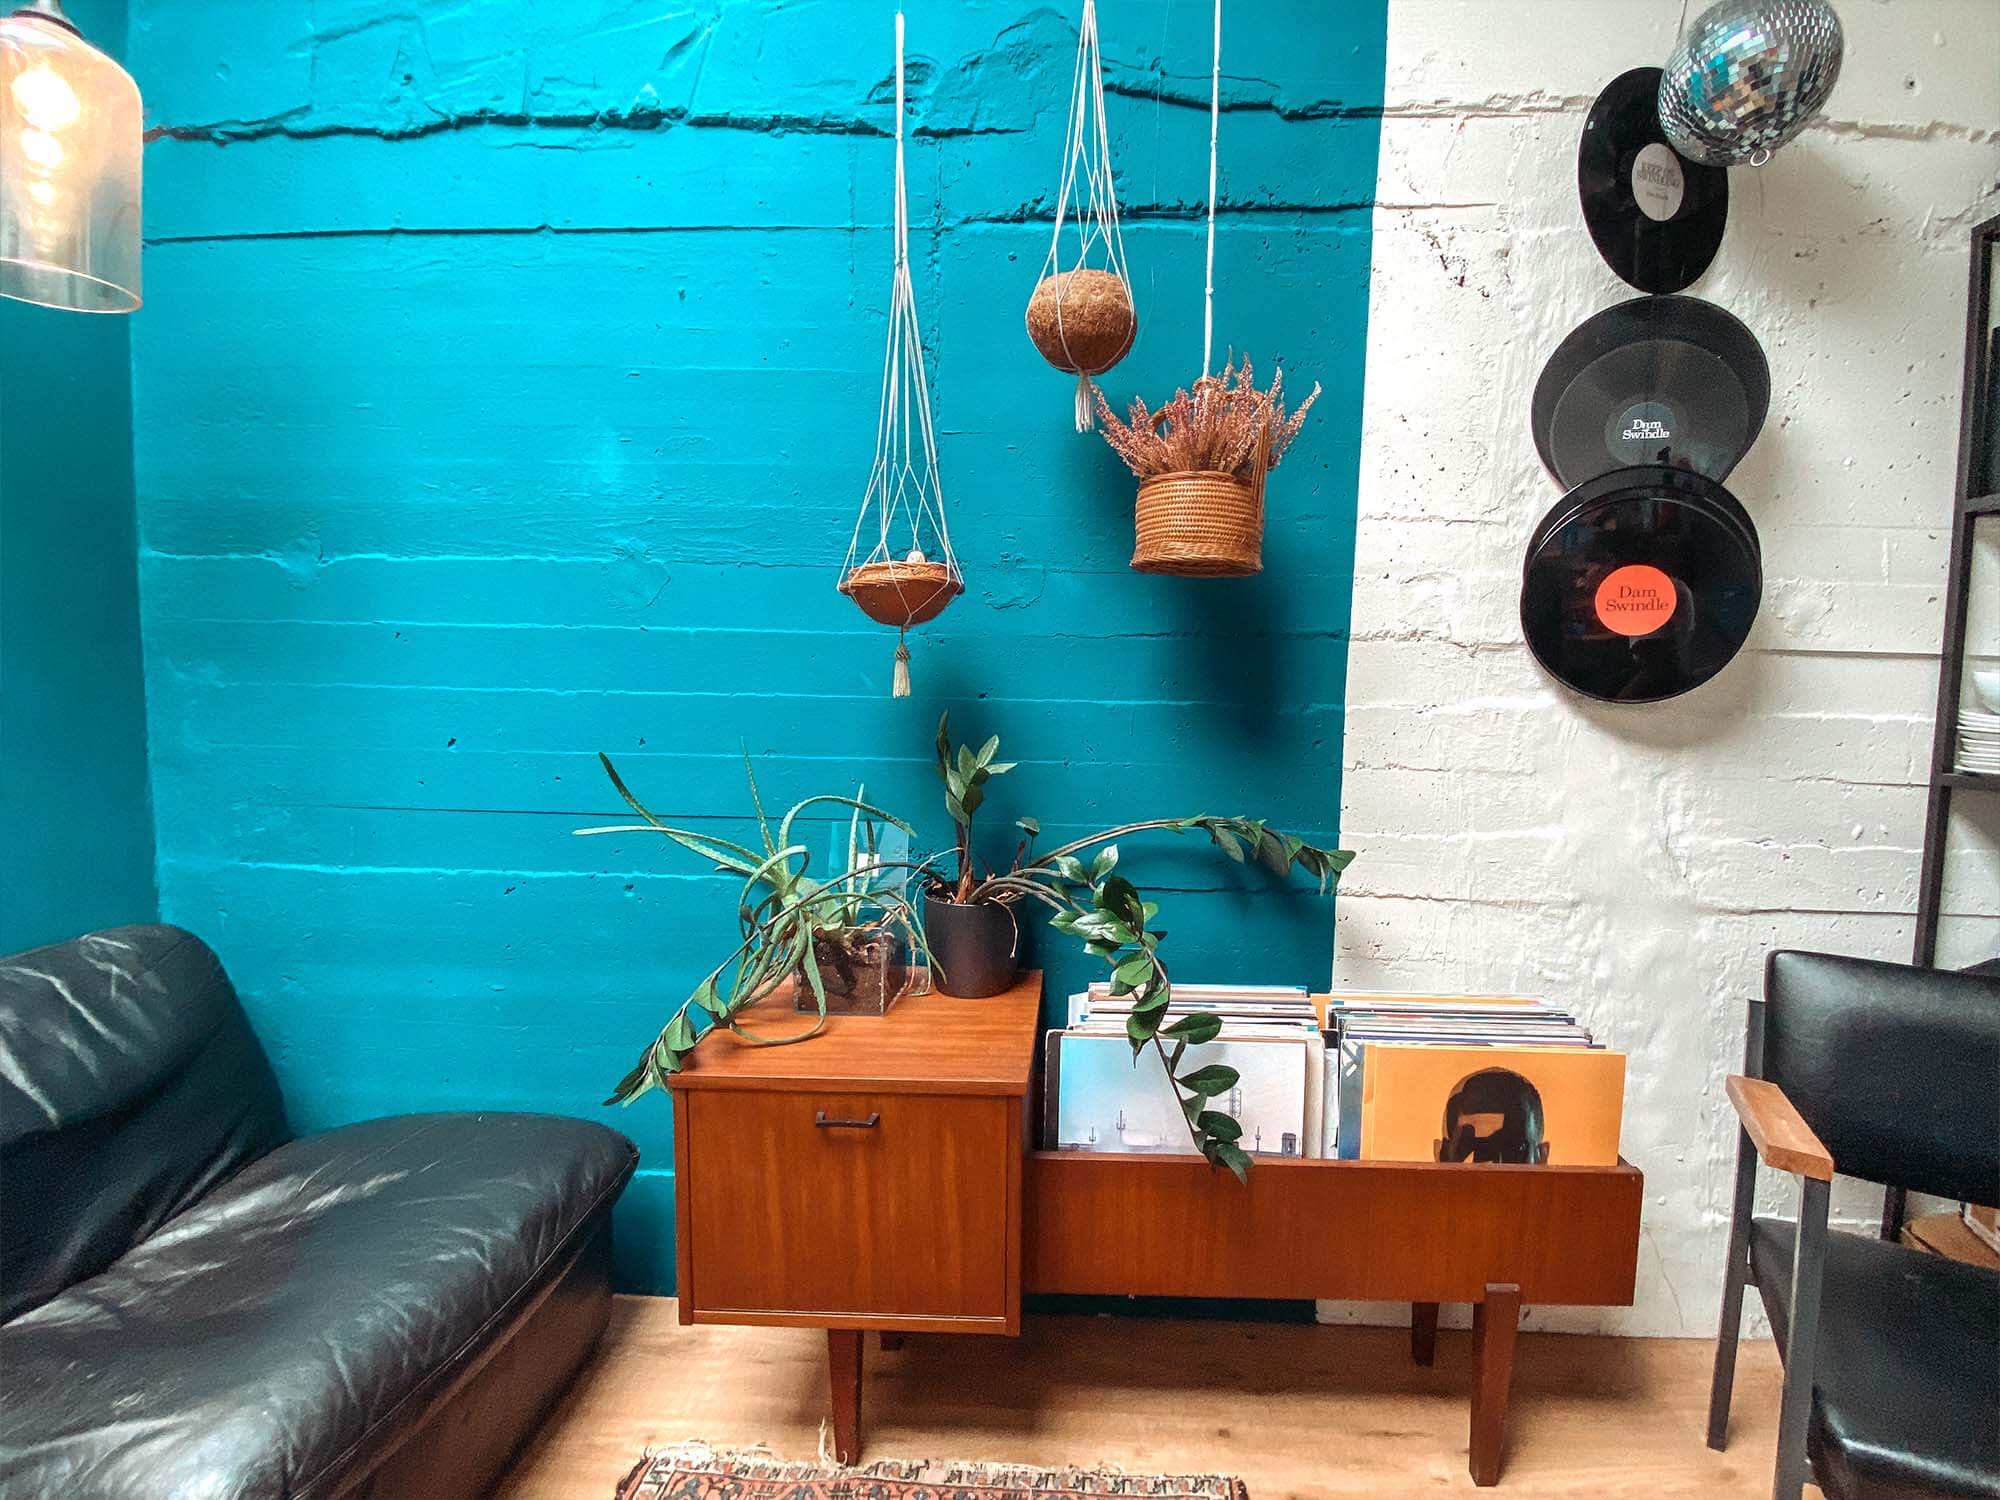 vinyl records in crate against blue wall with hanging baskets above